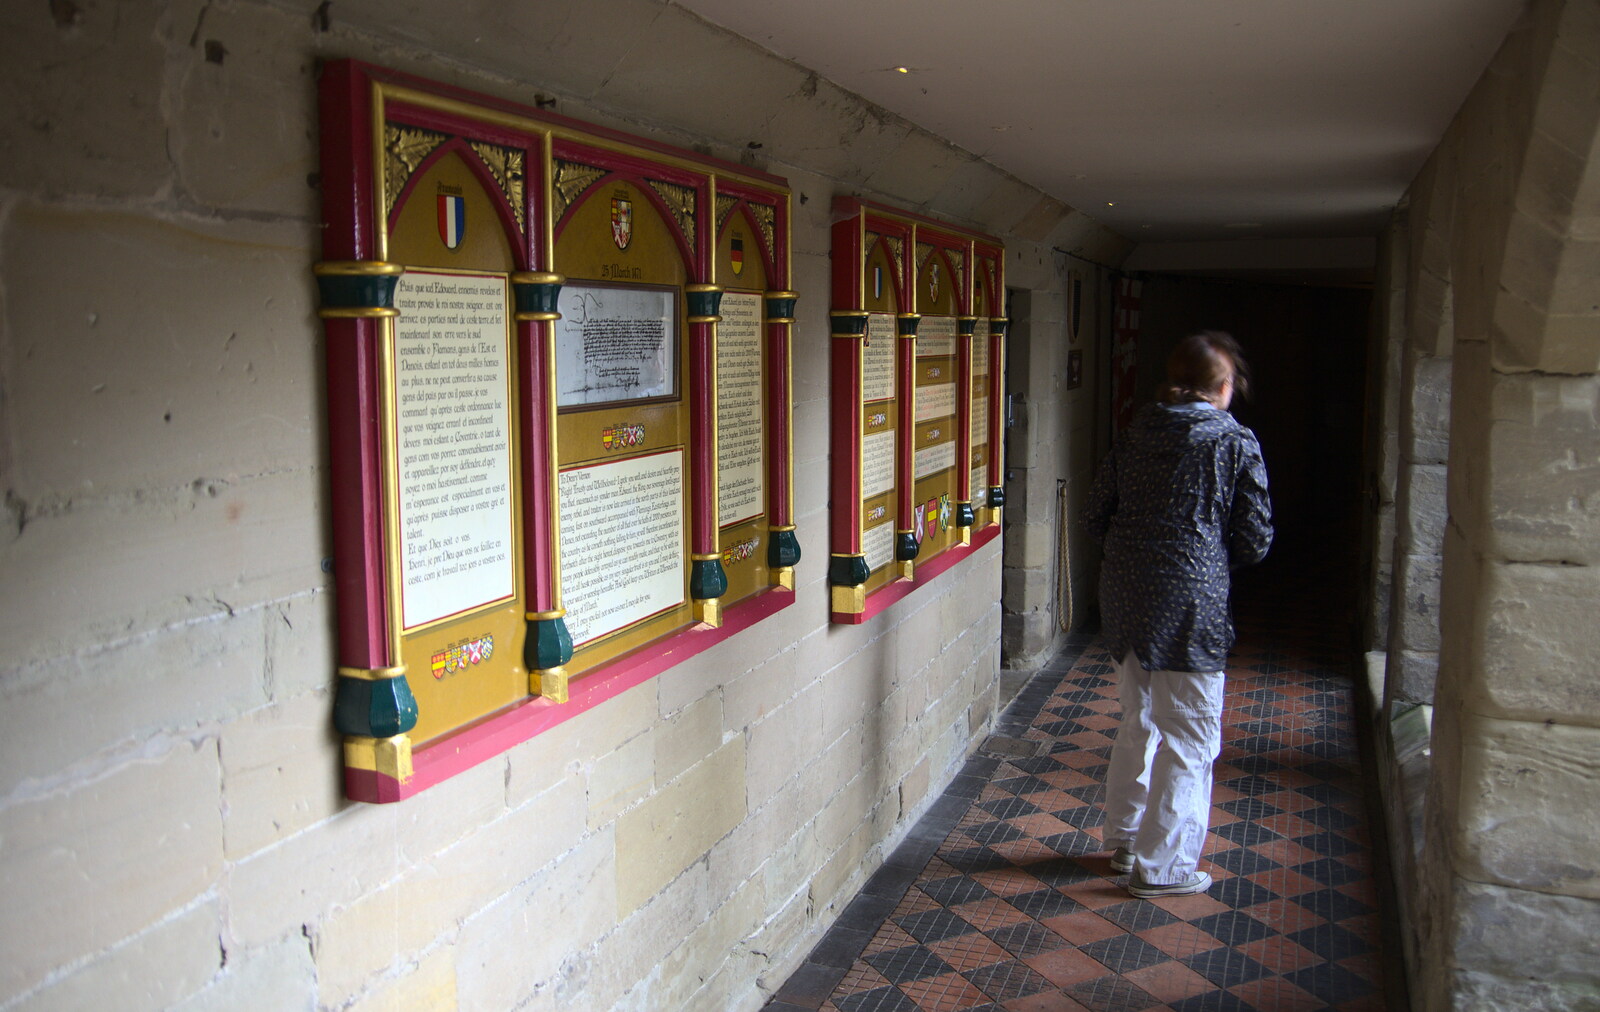 Isobel wanders a corridor from A Day at Warwick Castle, Warwickshire - 8th September 2018